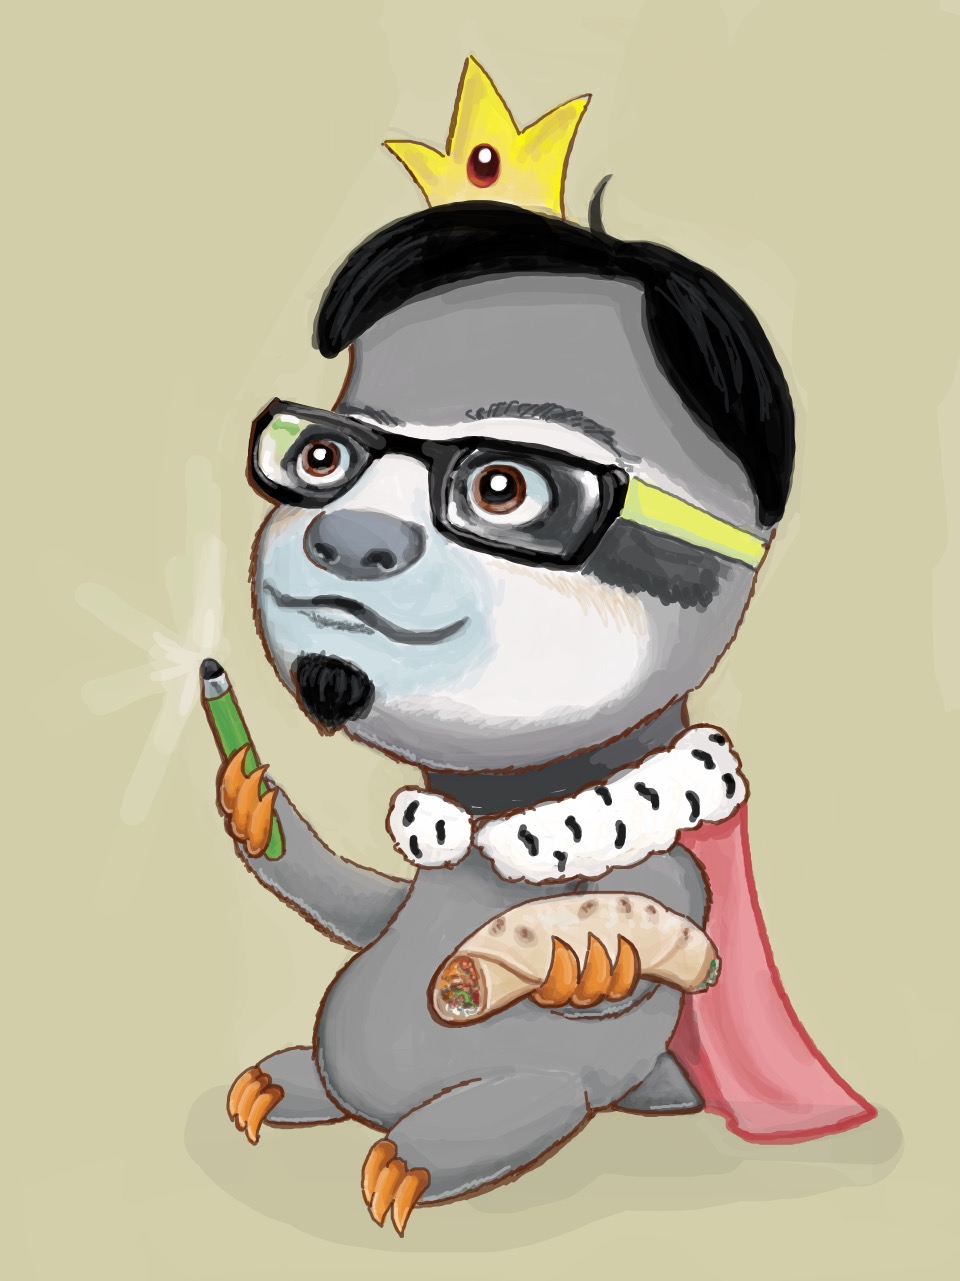 A chibi-style sloth wearing a crown, eyeglasses, and ermine cape, holding a stylus and a burrito.